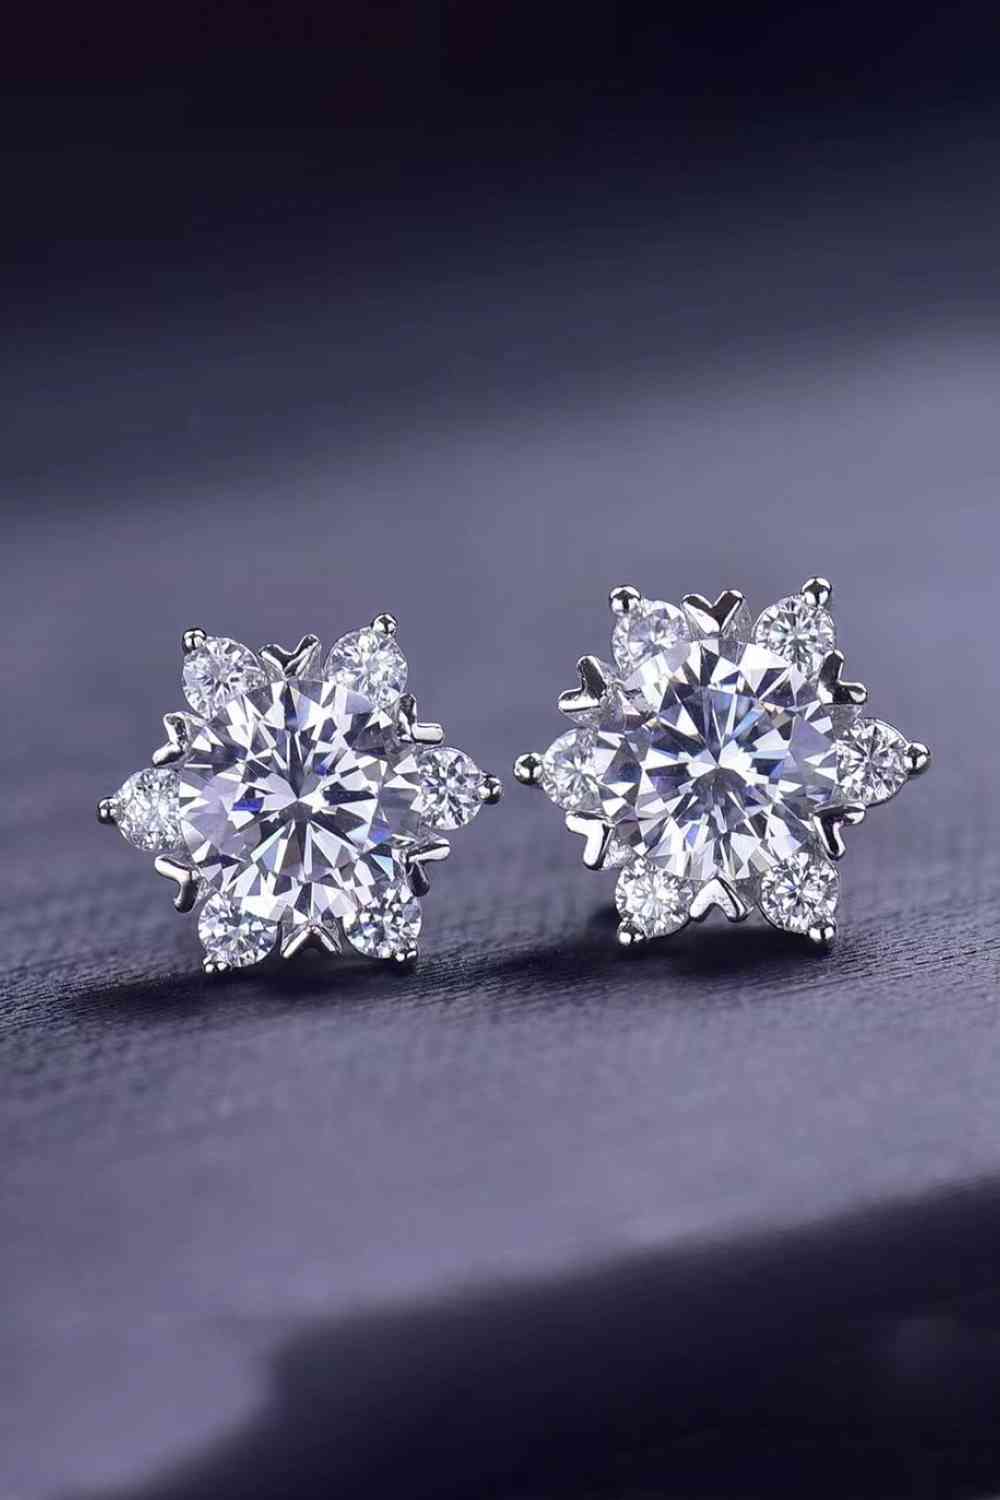 2 Carat Moissanite Floral Stud Earrings-Earrings-Inspired by Justeen-Women's Clothing Boutique in Chicago, Illinois